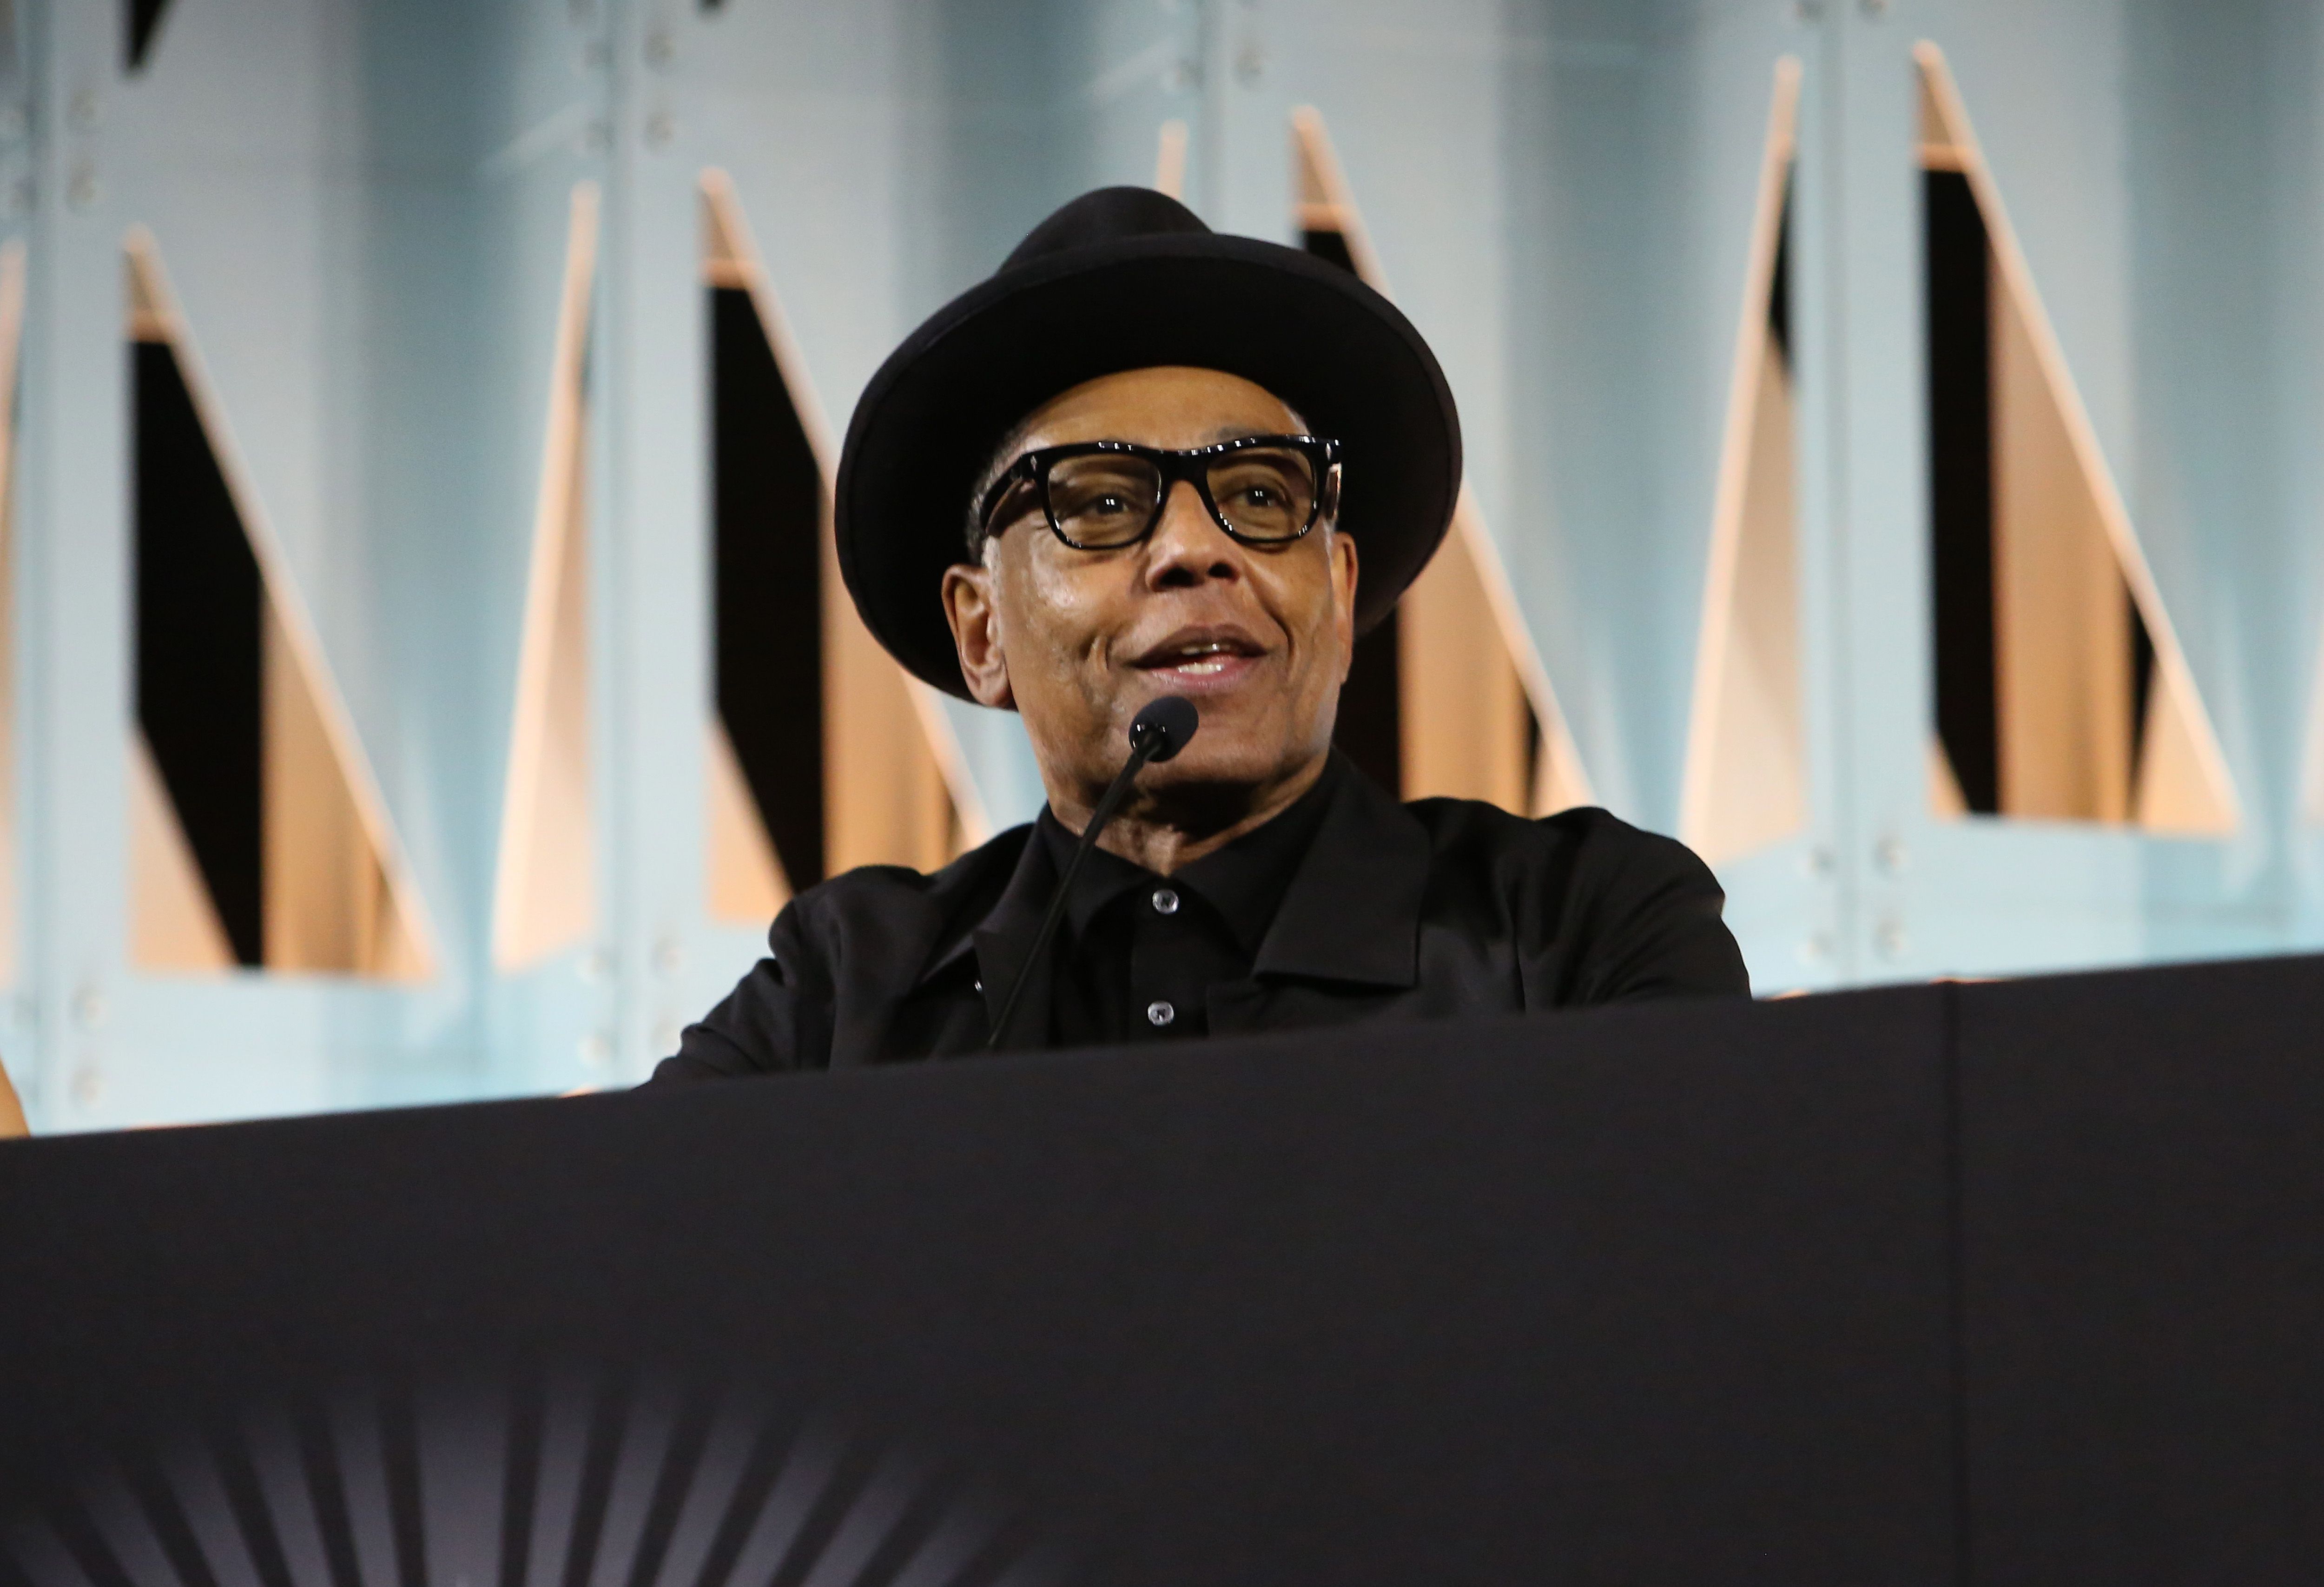 Better Call Saul actor Giancarlo Esposito attends the The Mandalorian panel at Star Wars Celebration 2022